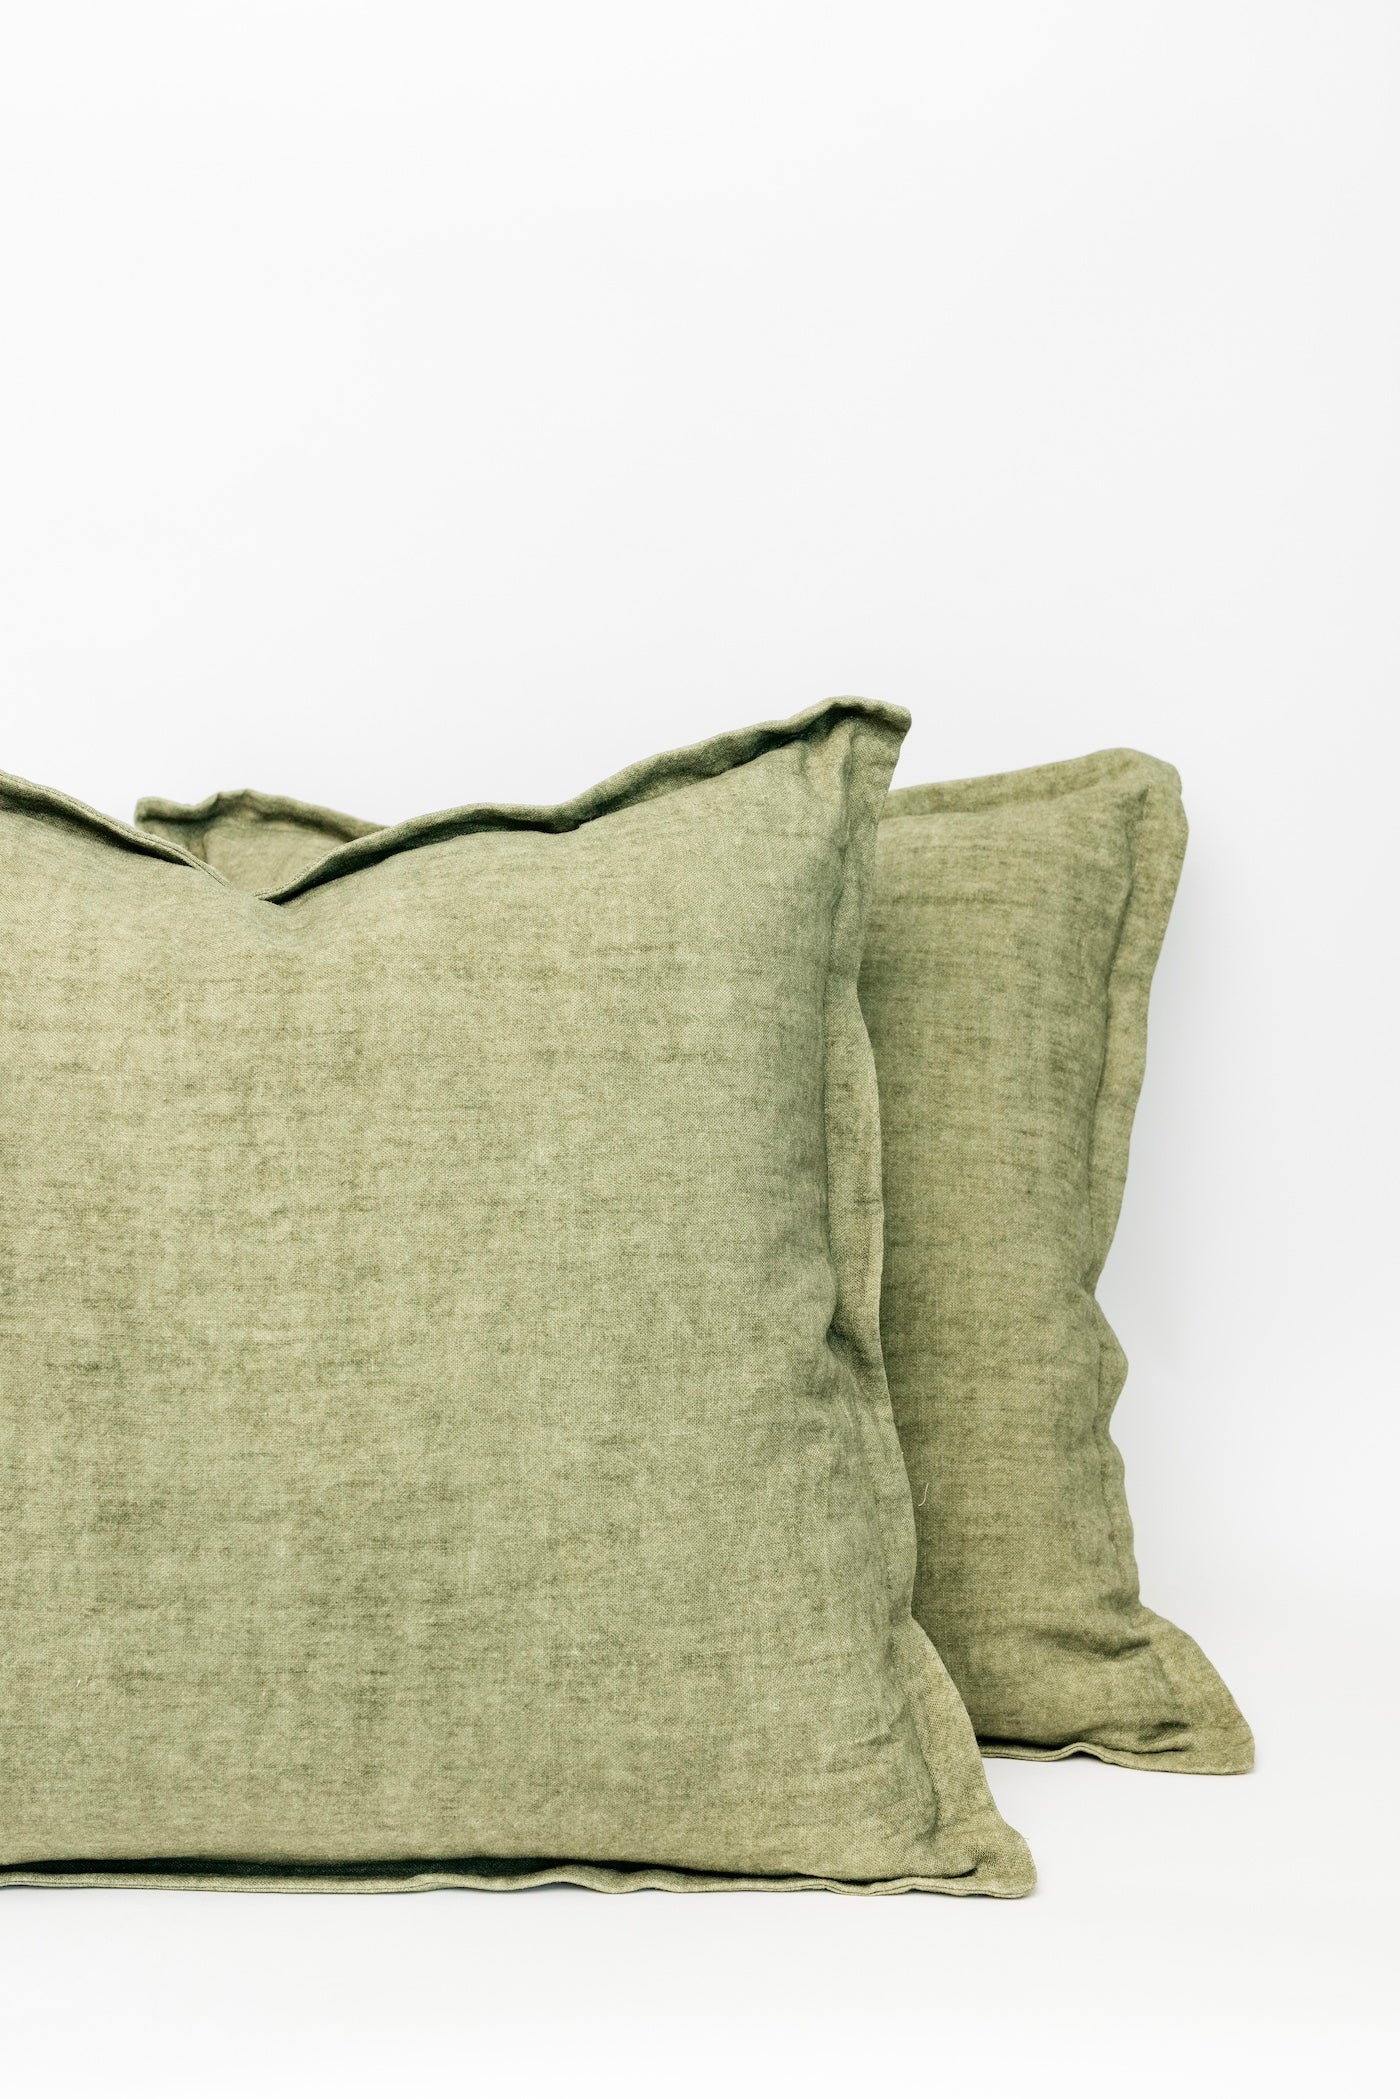 Callie Pillow - Olive - Set of 2